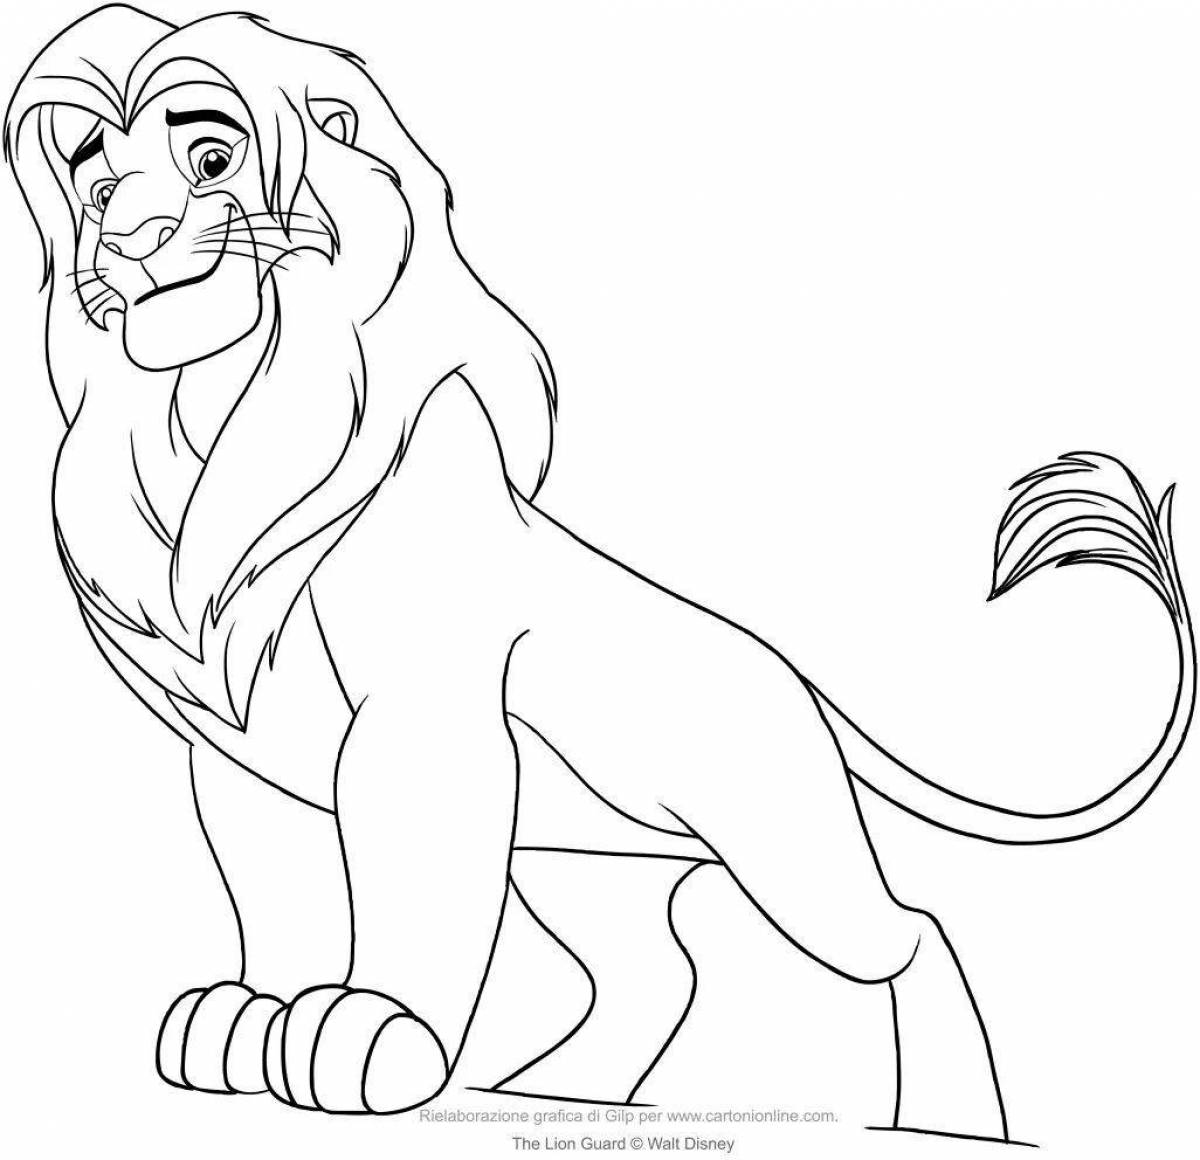 Coloring book bright lion king